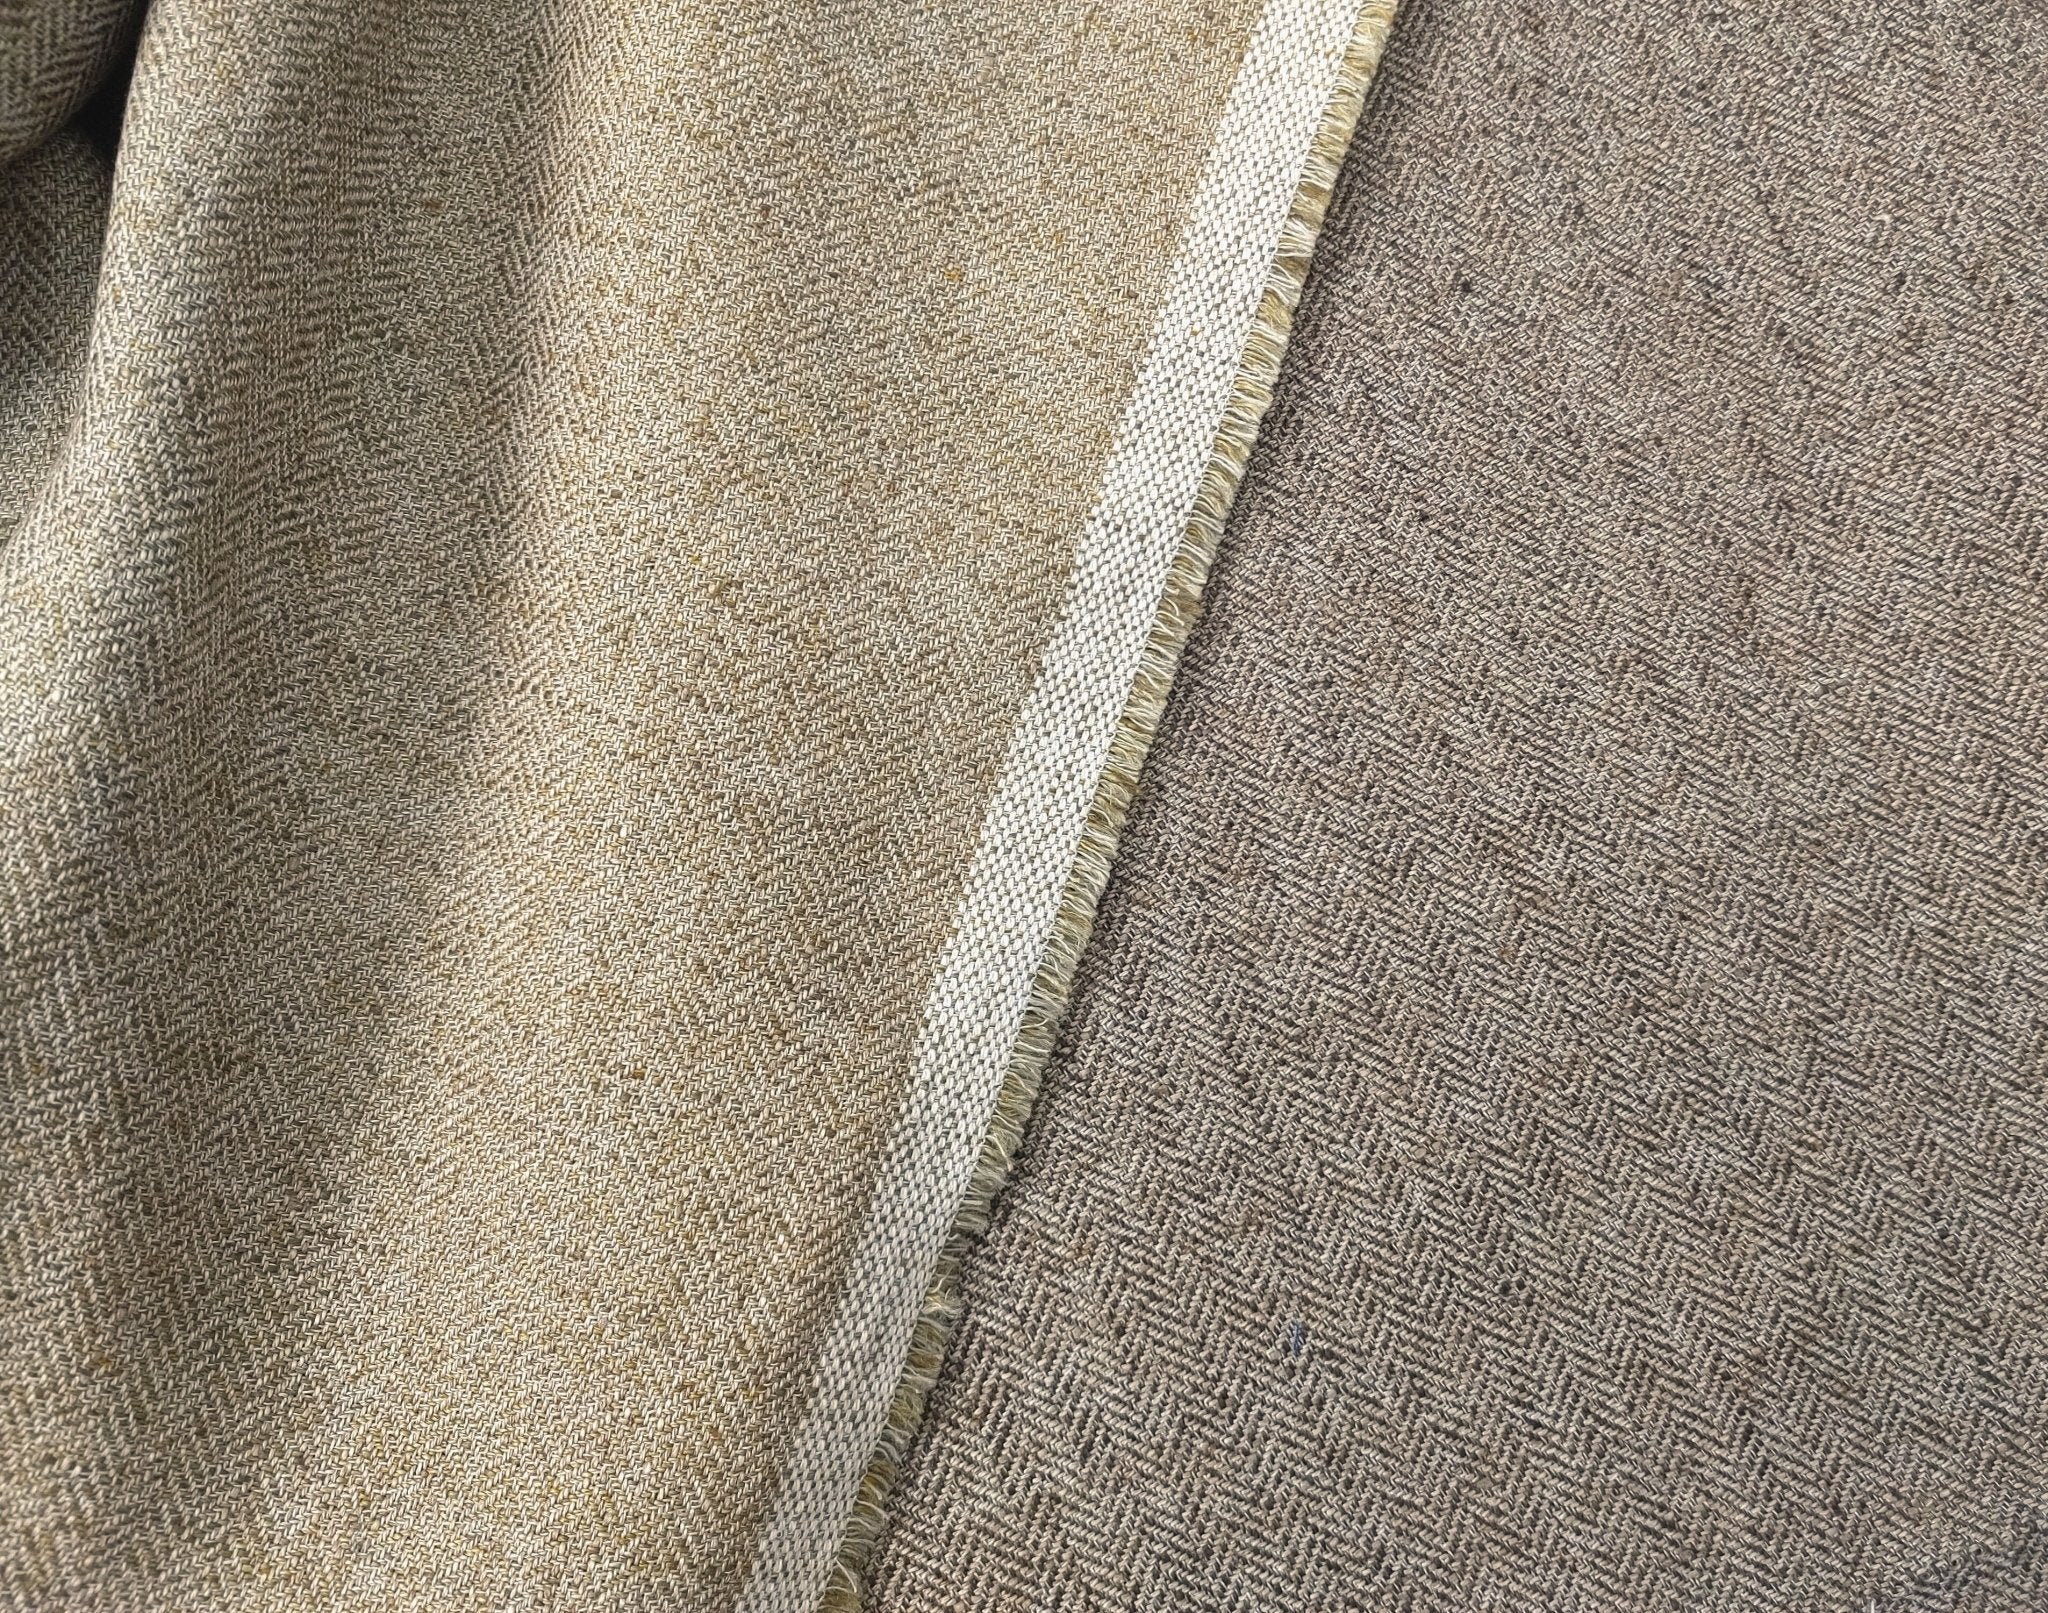 Linen Polyester HBT Herringbone Twill Fabric with Melange Effect Heavy Weight 7353 7821 - The Linen Lab - Beige